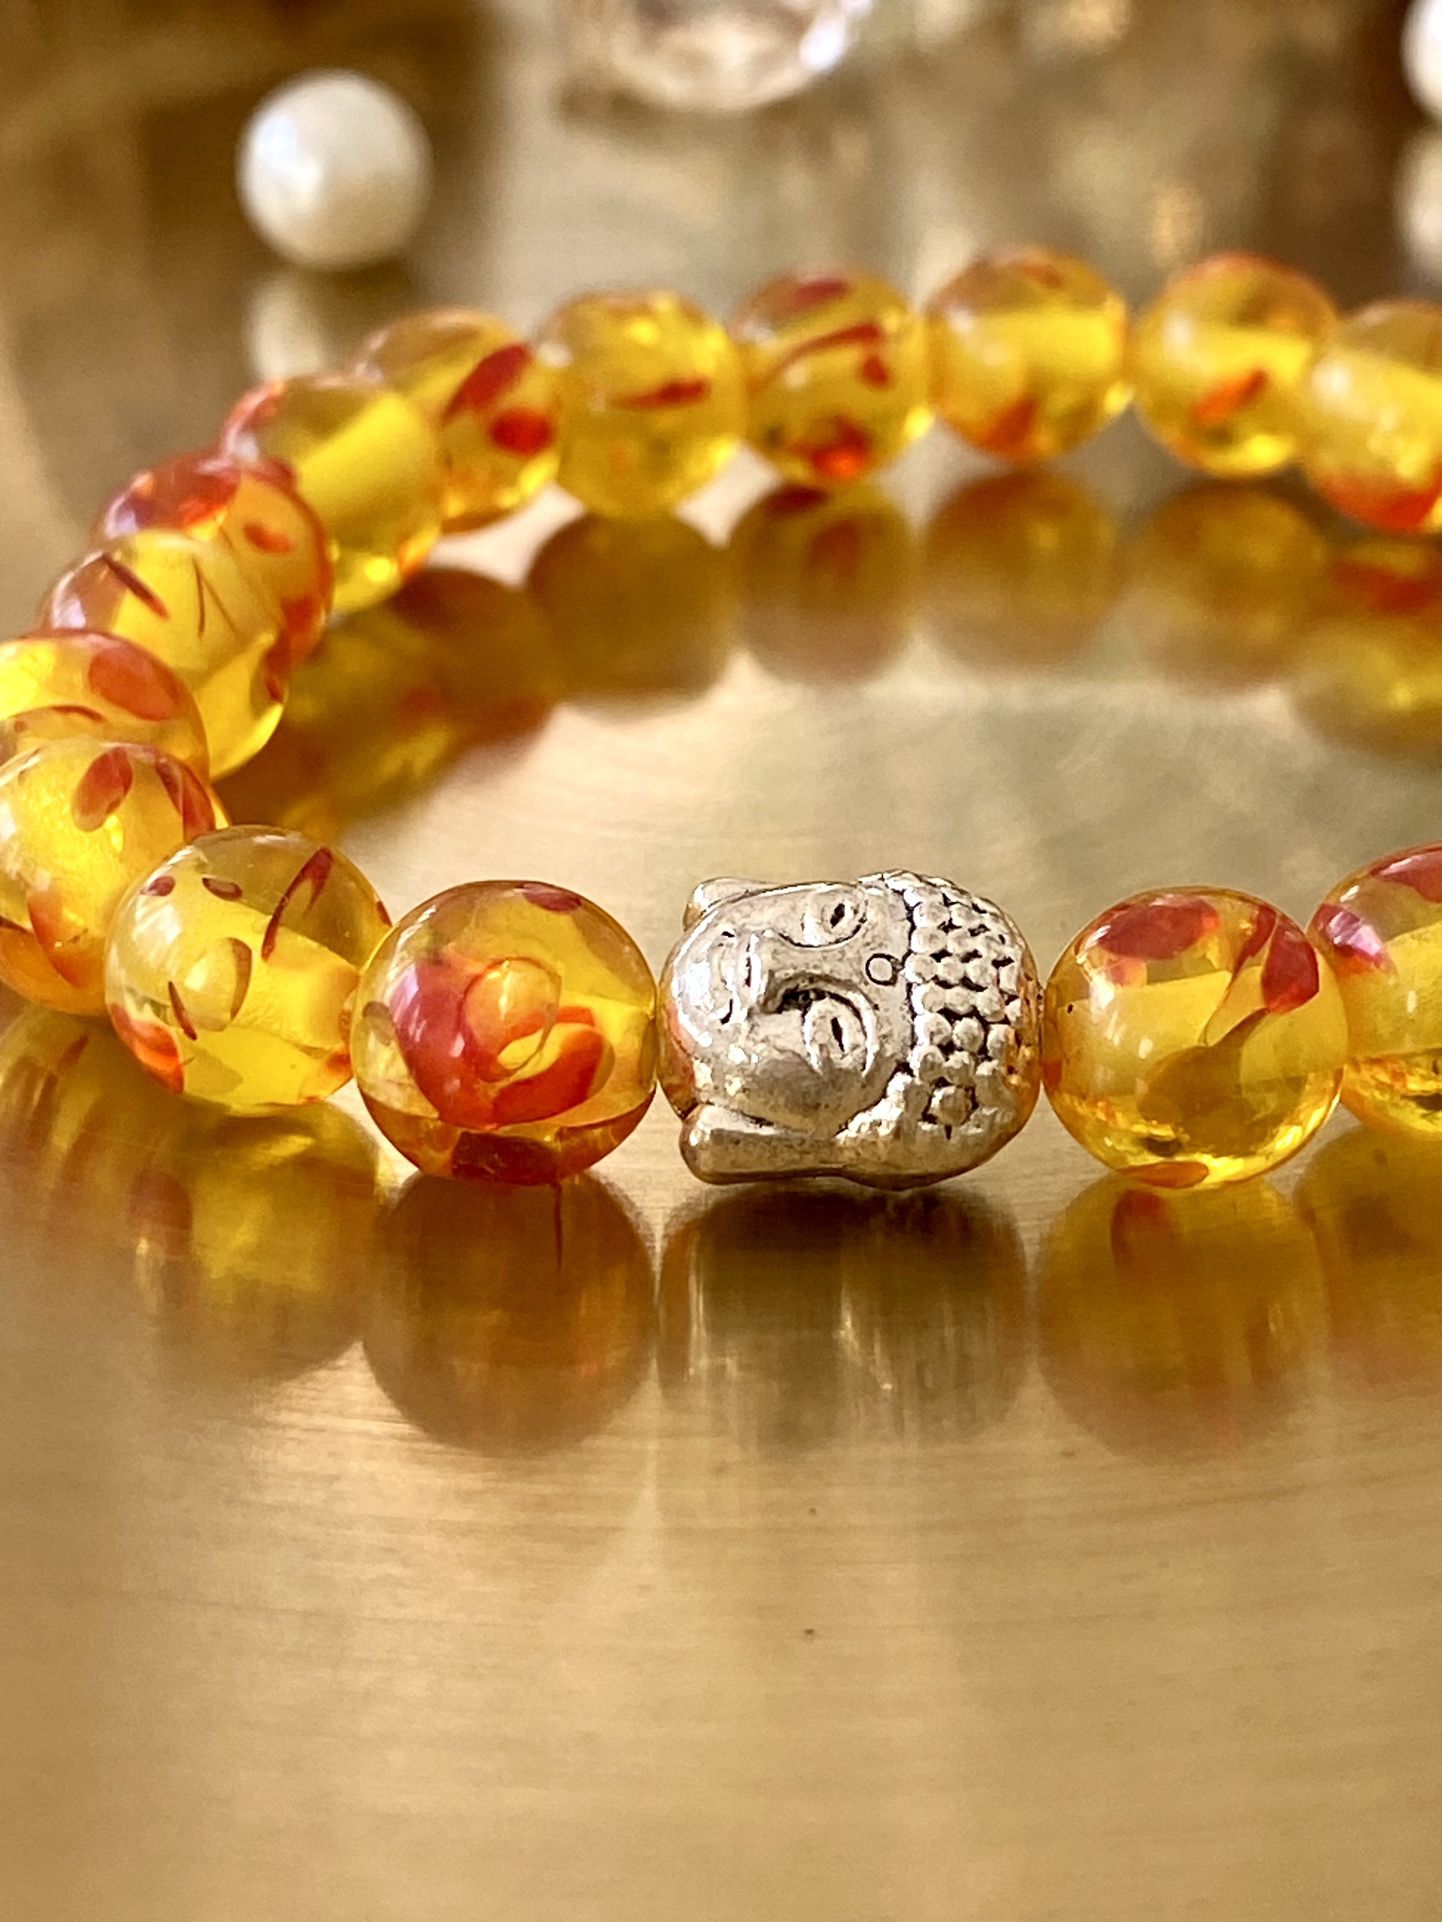 Baltic Amber Stretchable Beaded Bracelet With Silver Charm